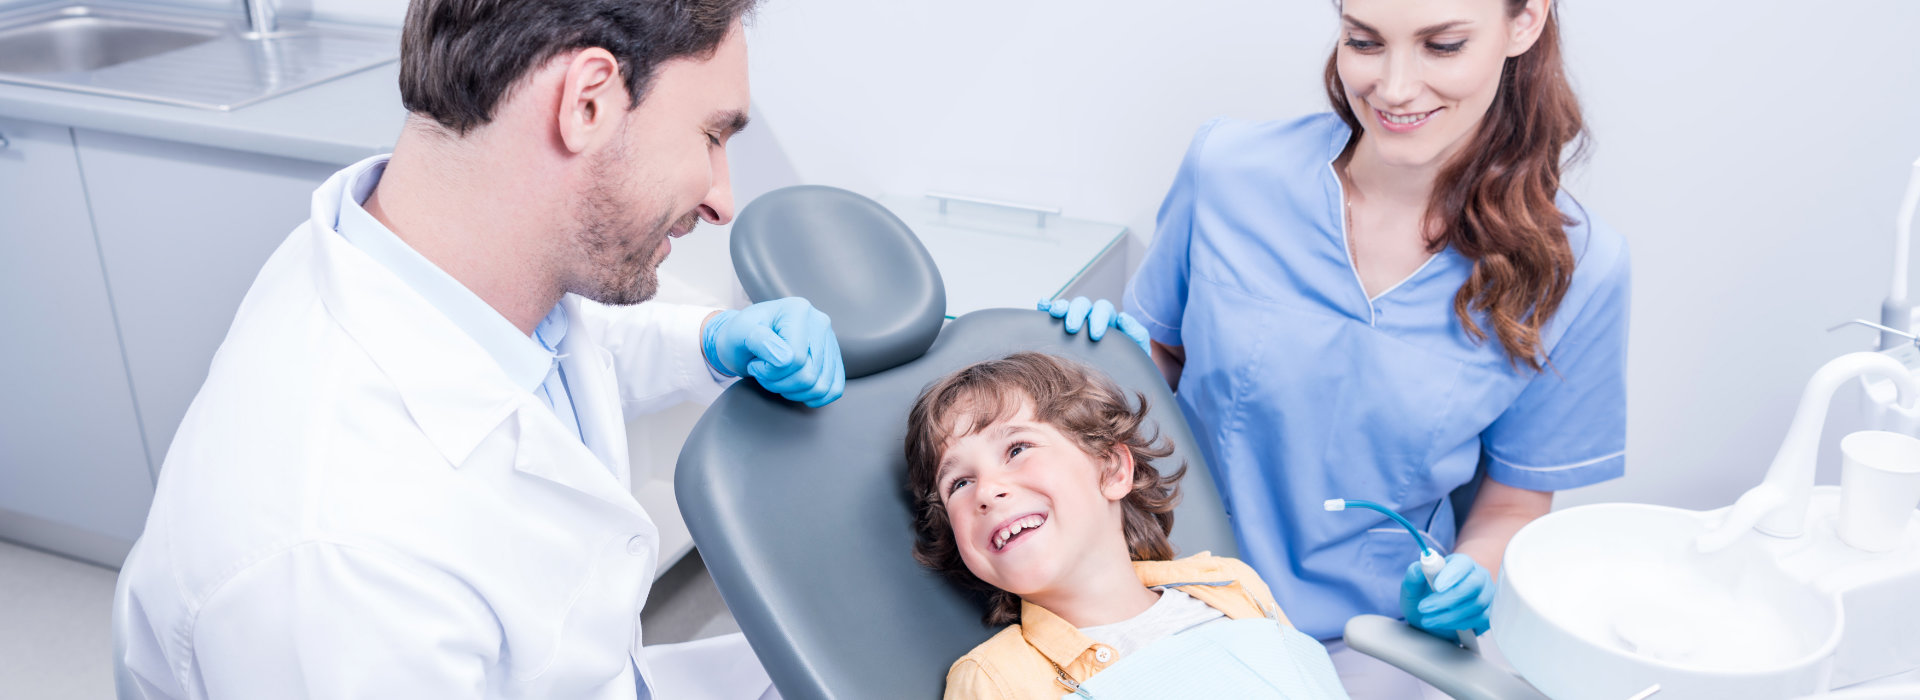 A kid is smiling after pediatric dentistry.